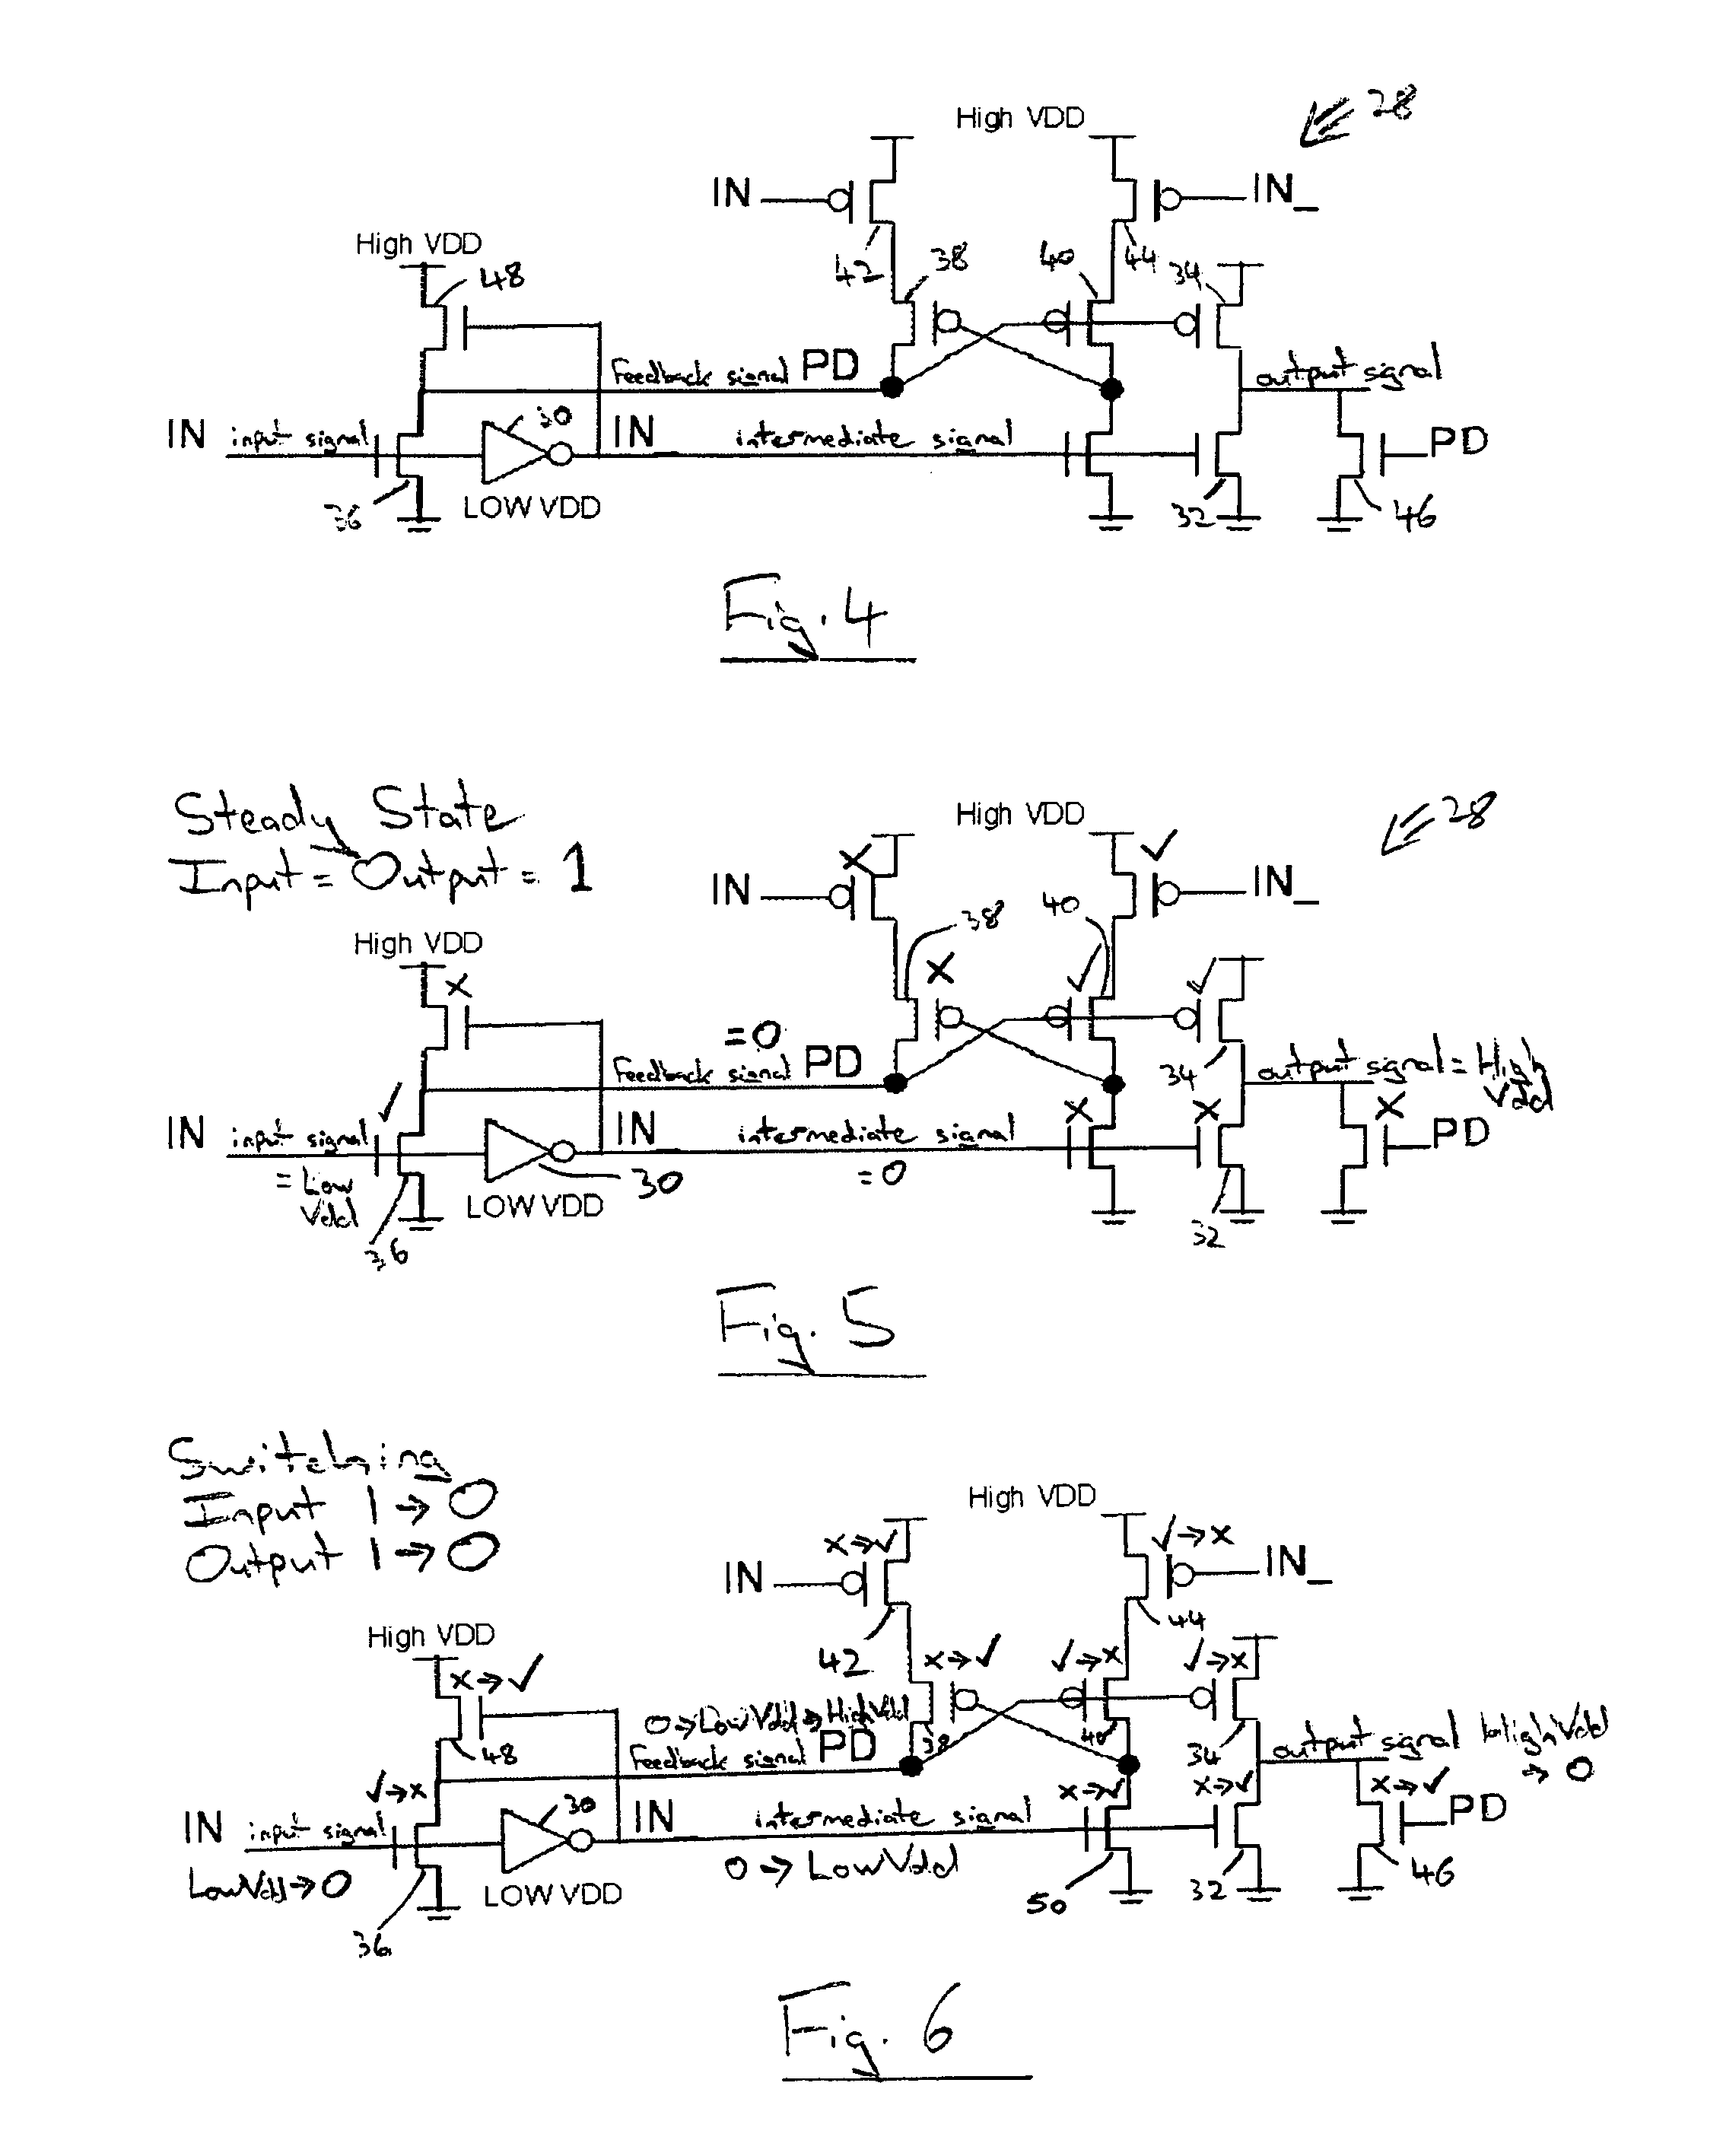 Level shifter for use between voltage domains